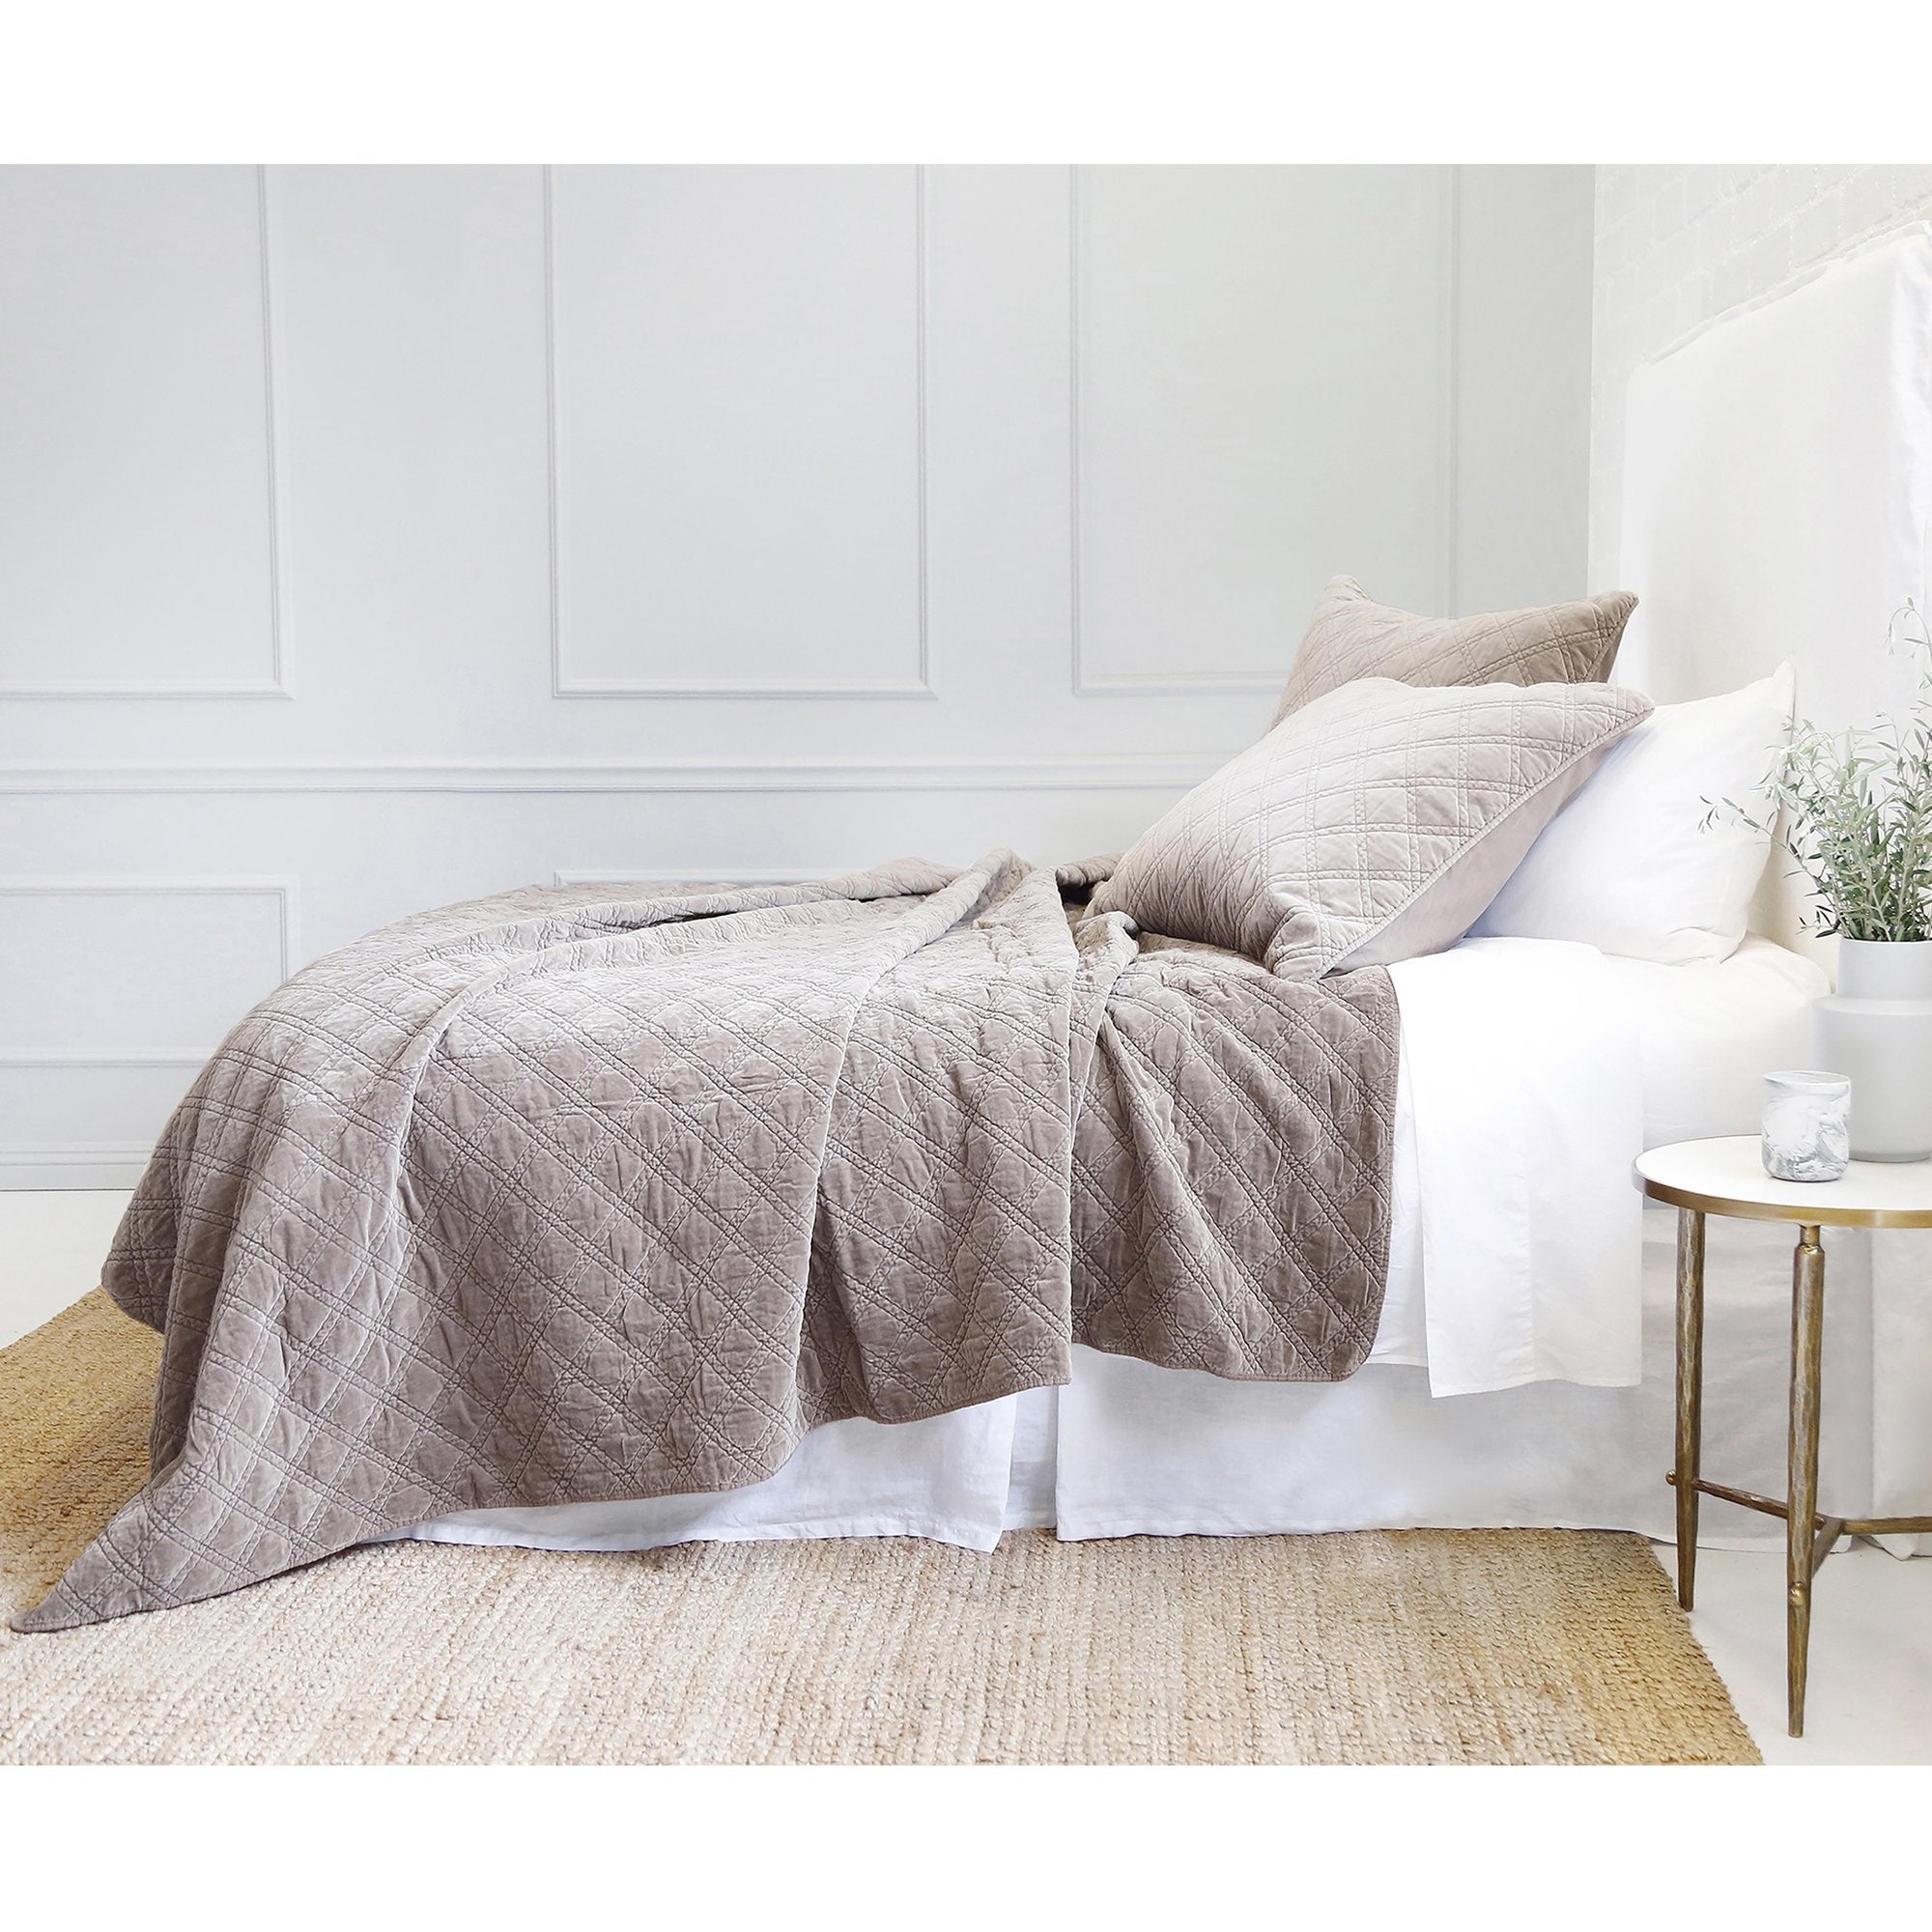 The Brussels Coverlet Bedding Walnut by Pom Pom at Home is a grand and sophisticated line that has a diamond quilted pattern on the front, made of 100% stone washed cotton velvet. Available in several soft, stone washed colors.  100% cotton velvet Machine wash cold; tumble dry low; warm iron as needed Do not bleach